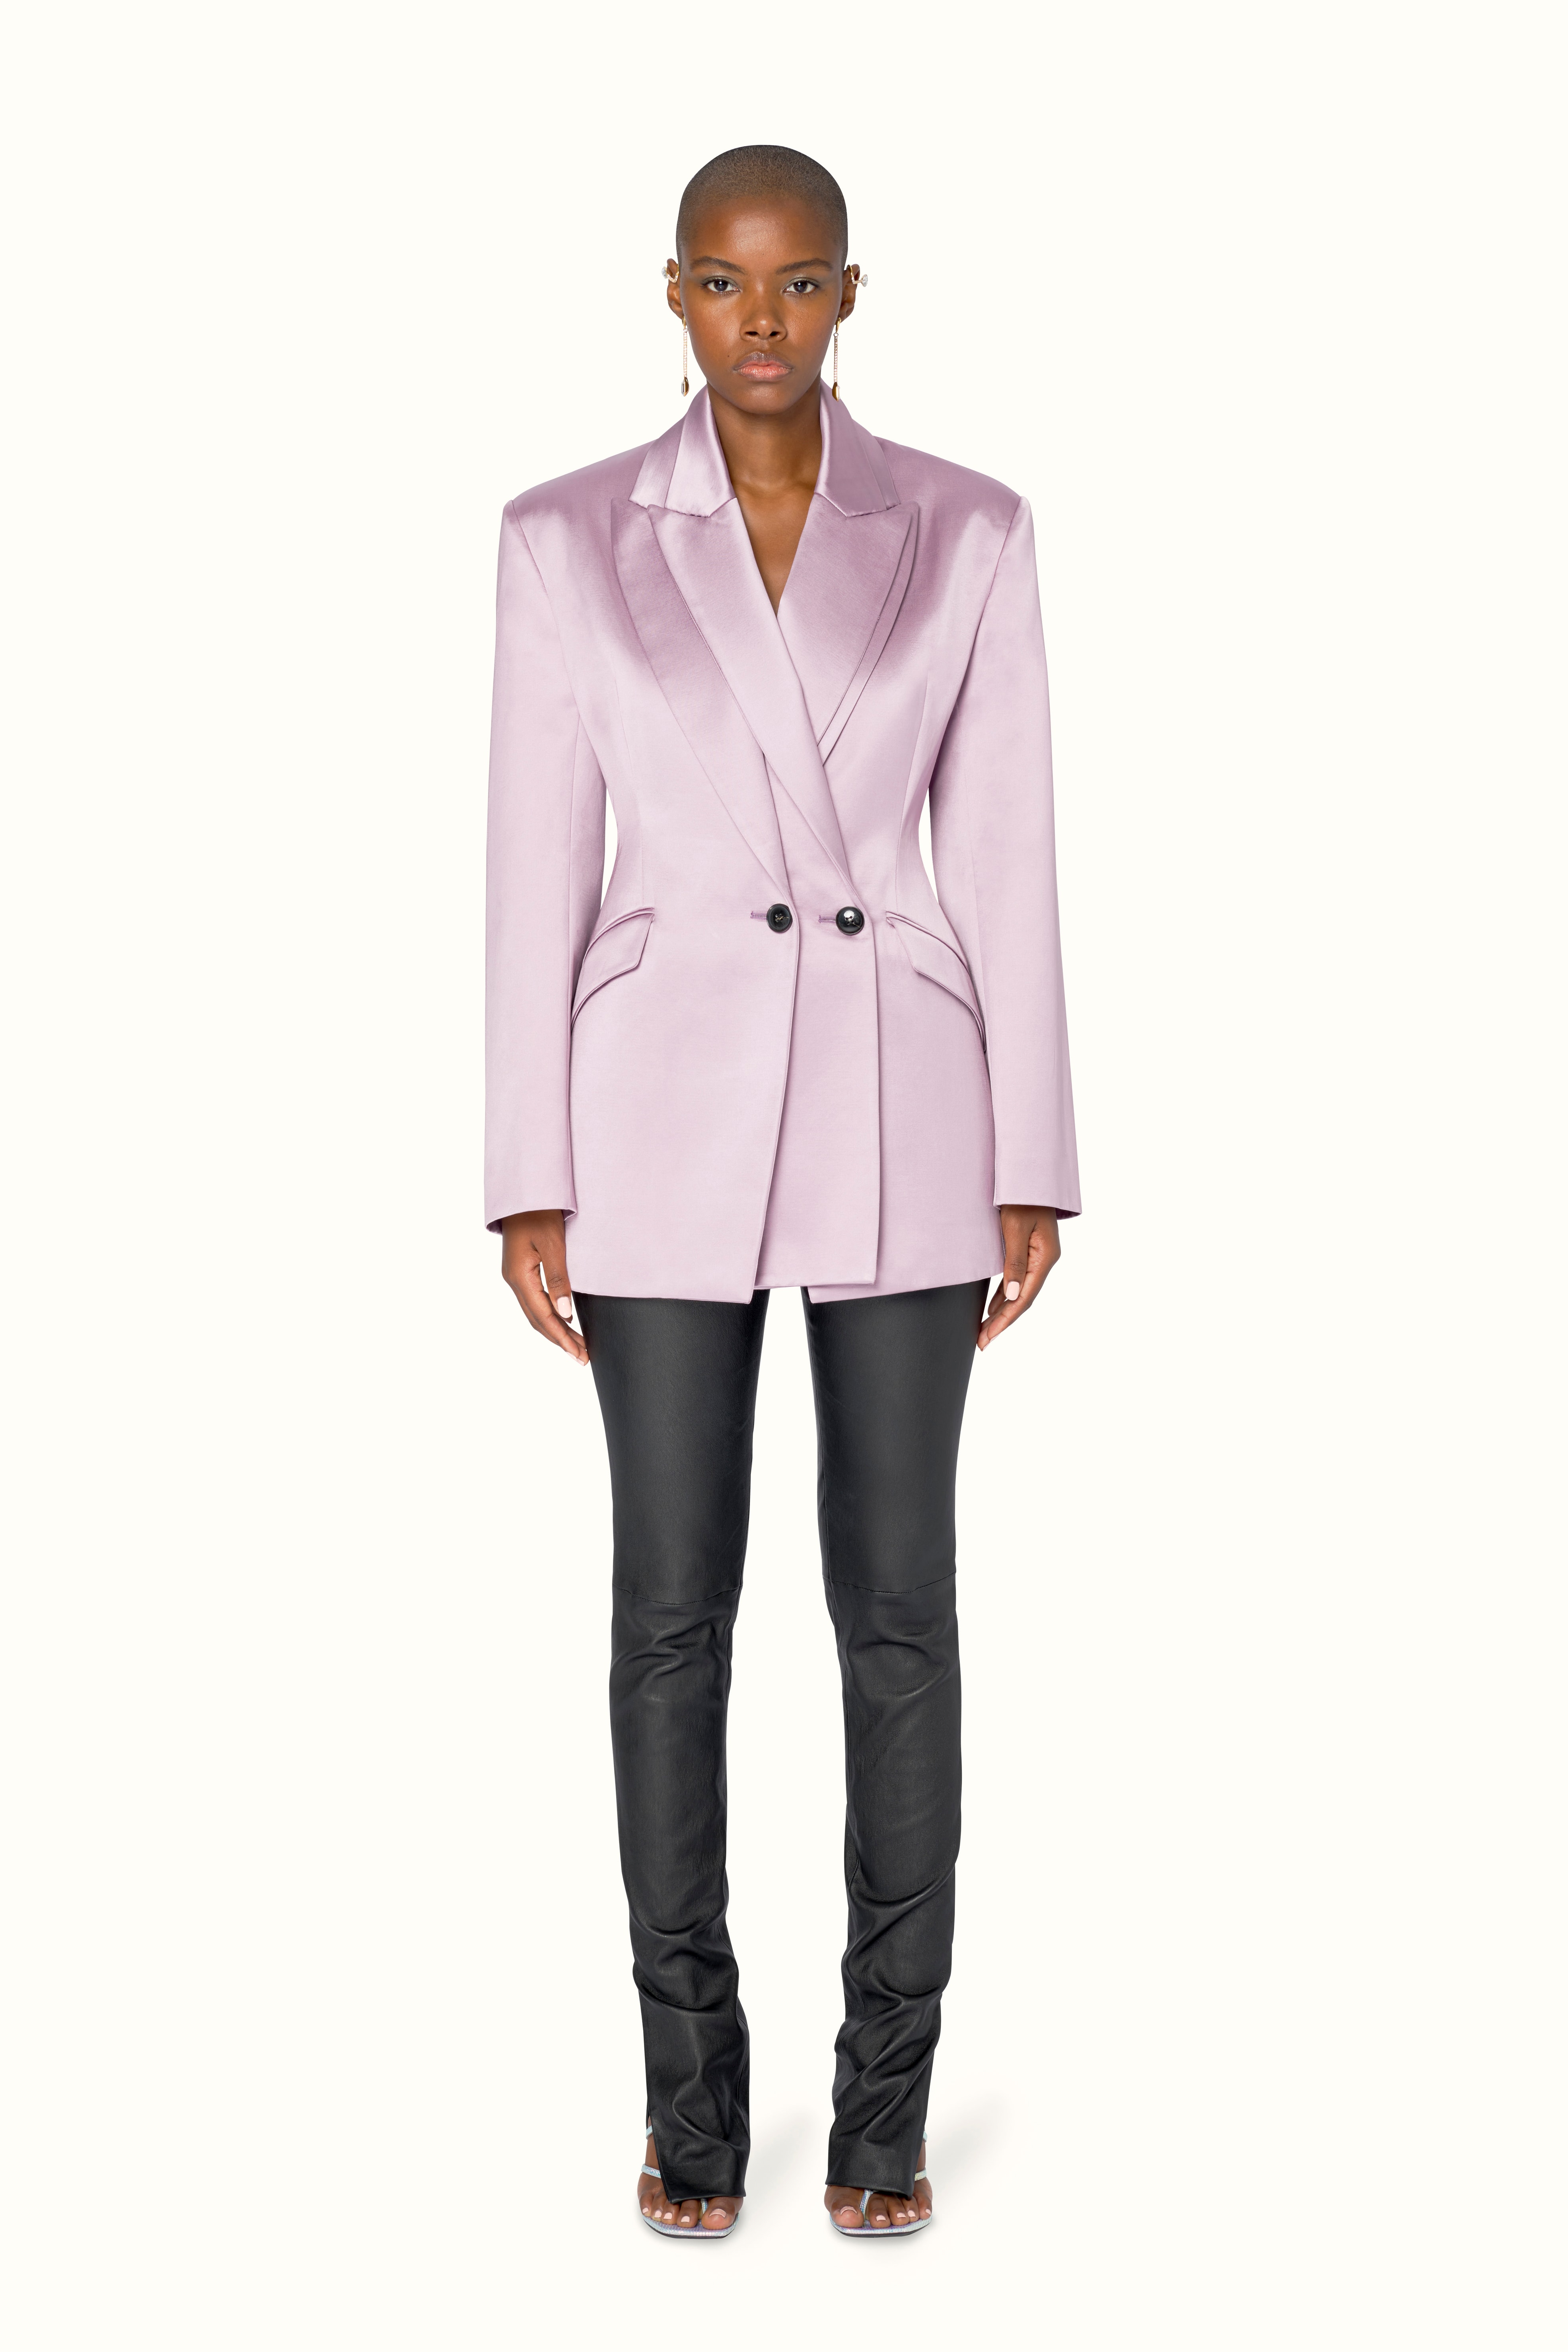 Rihanna FENTY 8-19 Collection Lookbook Release Drop Date Pieces Blazer Sunglasses Where to buy Fenty LVMH Available now